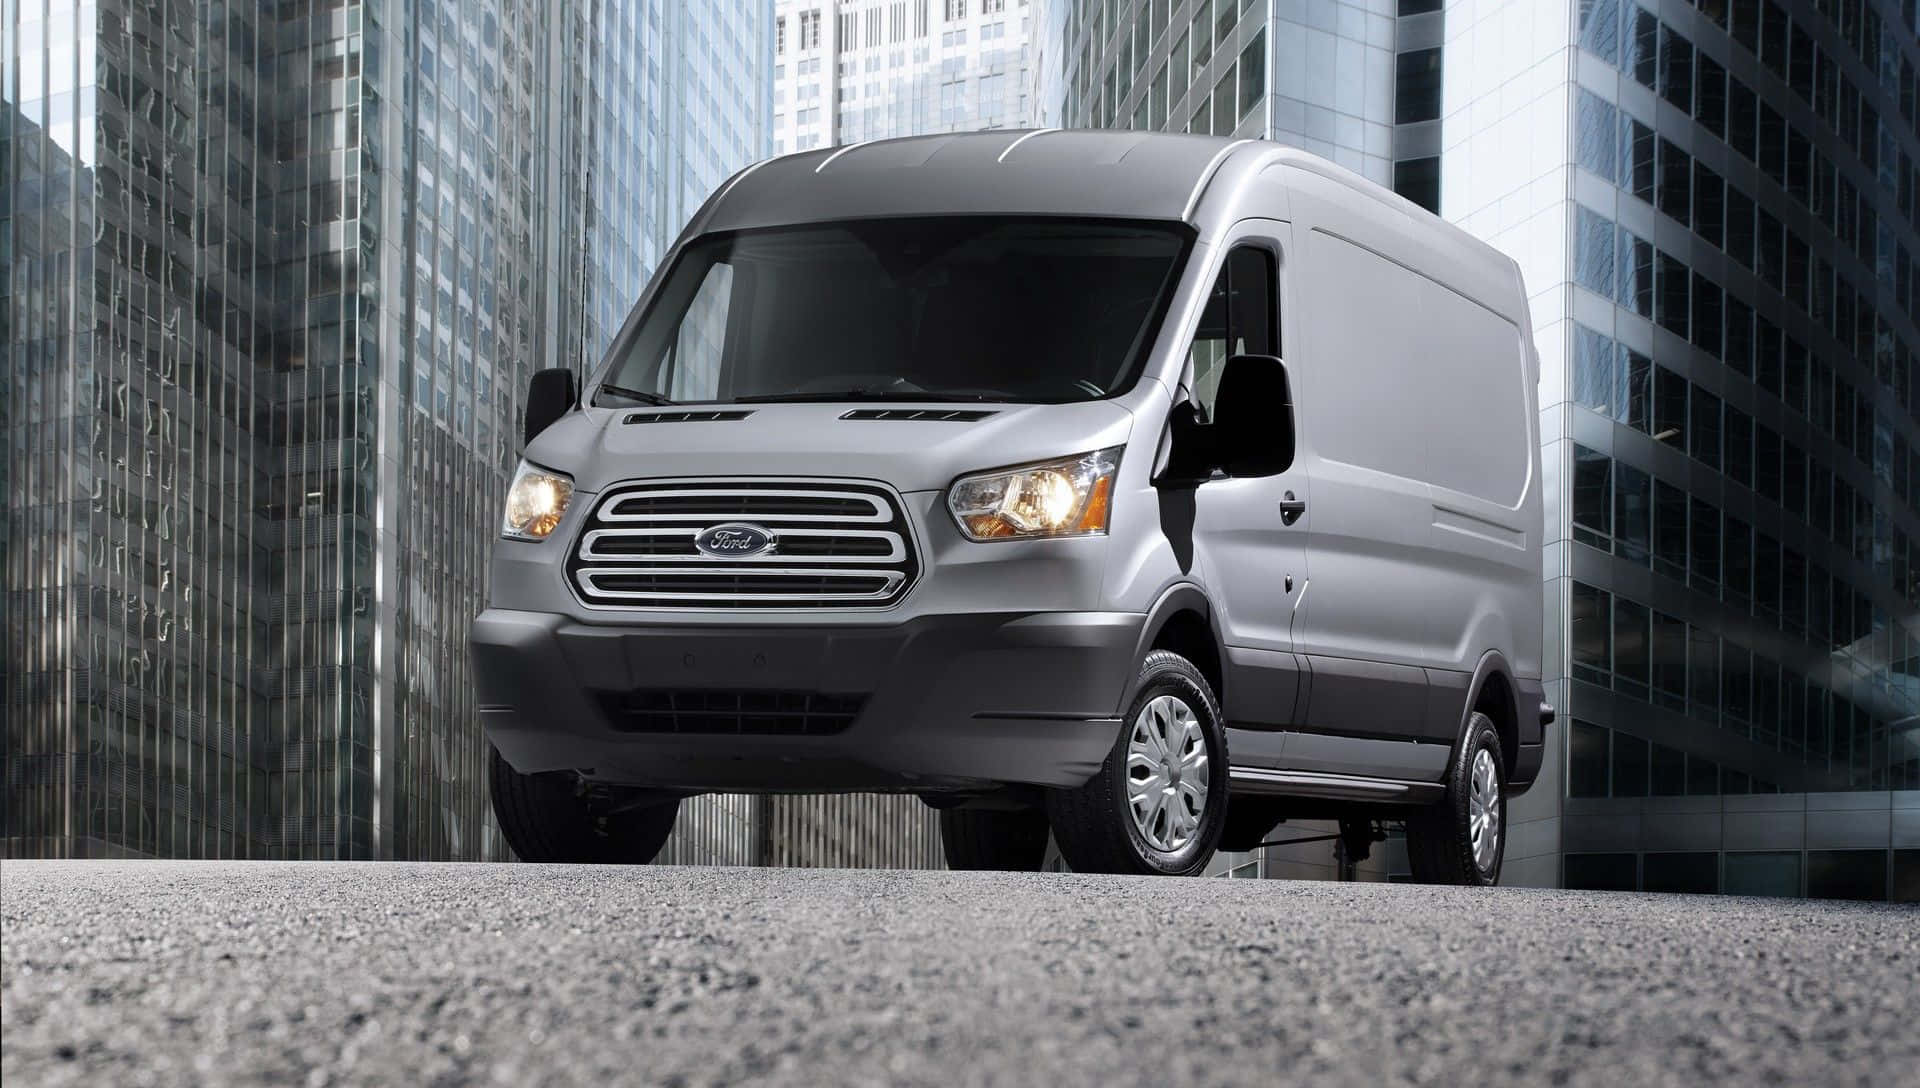 Stylish Ford Transit on the Road Wallpaper